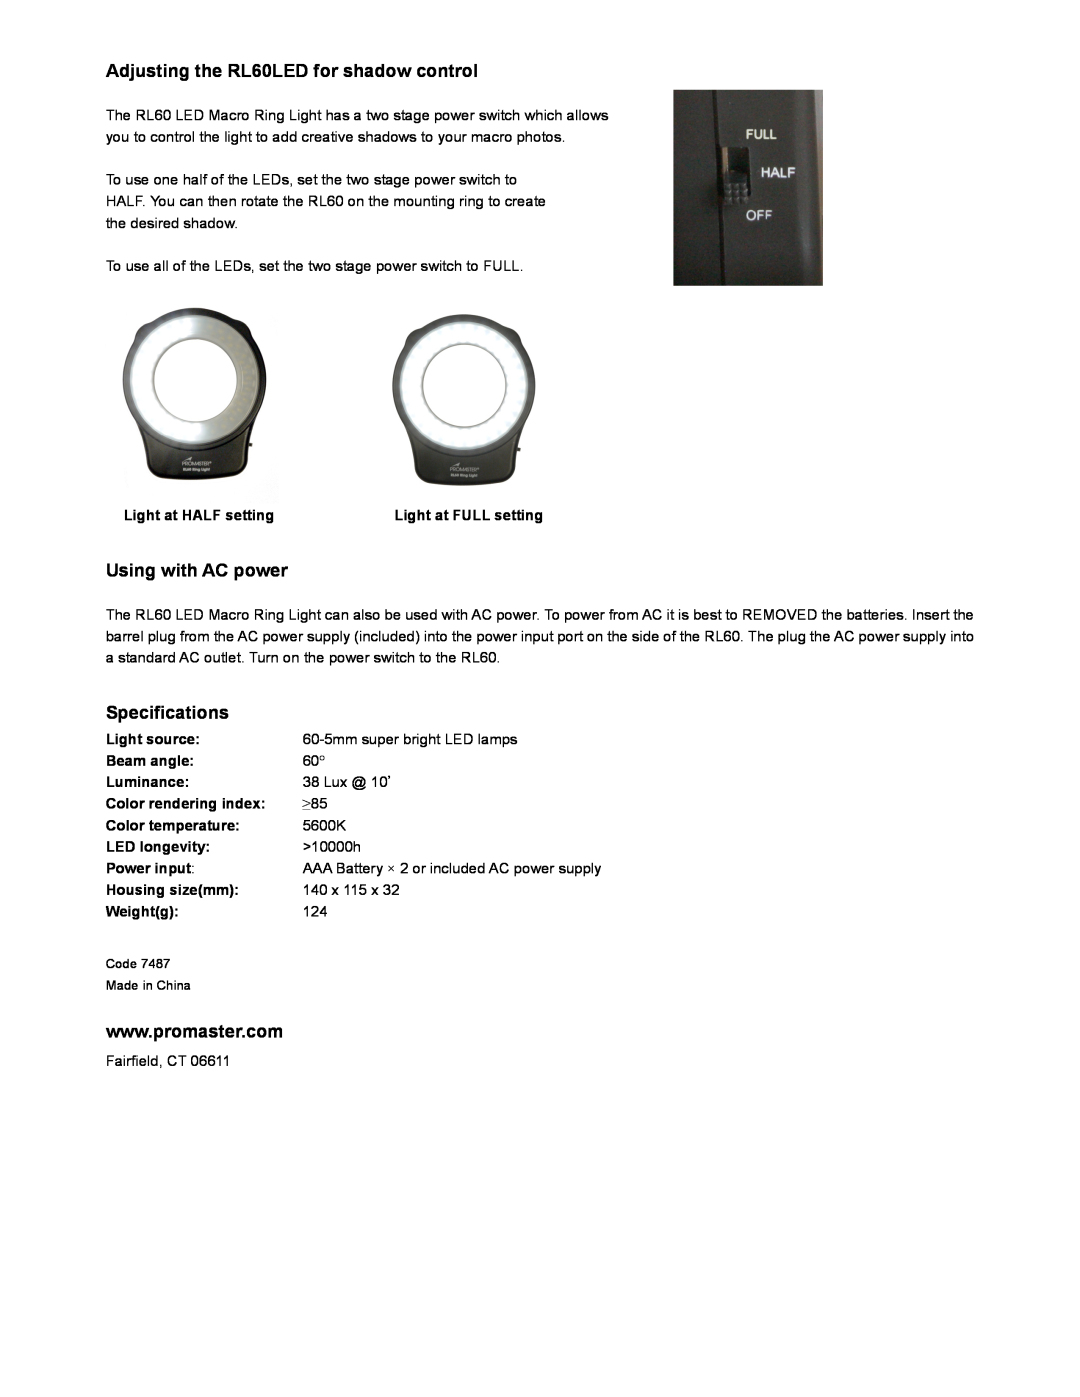 ProMaster manual Adjusting the RL60LED for shadow control, Using with AC power, Specifications 